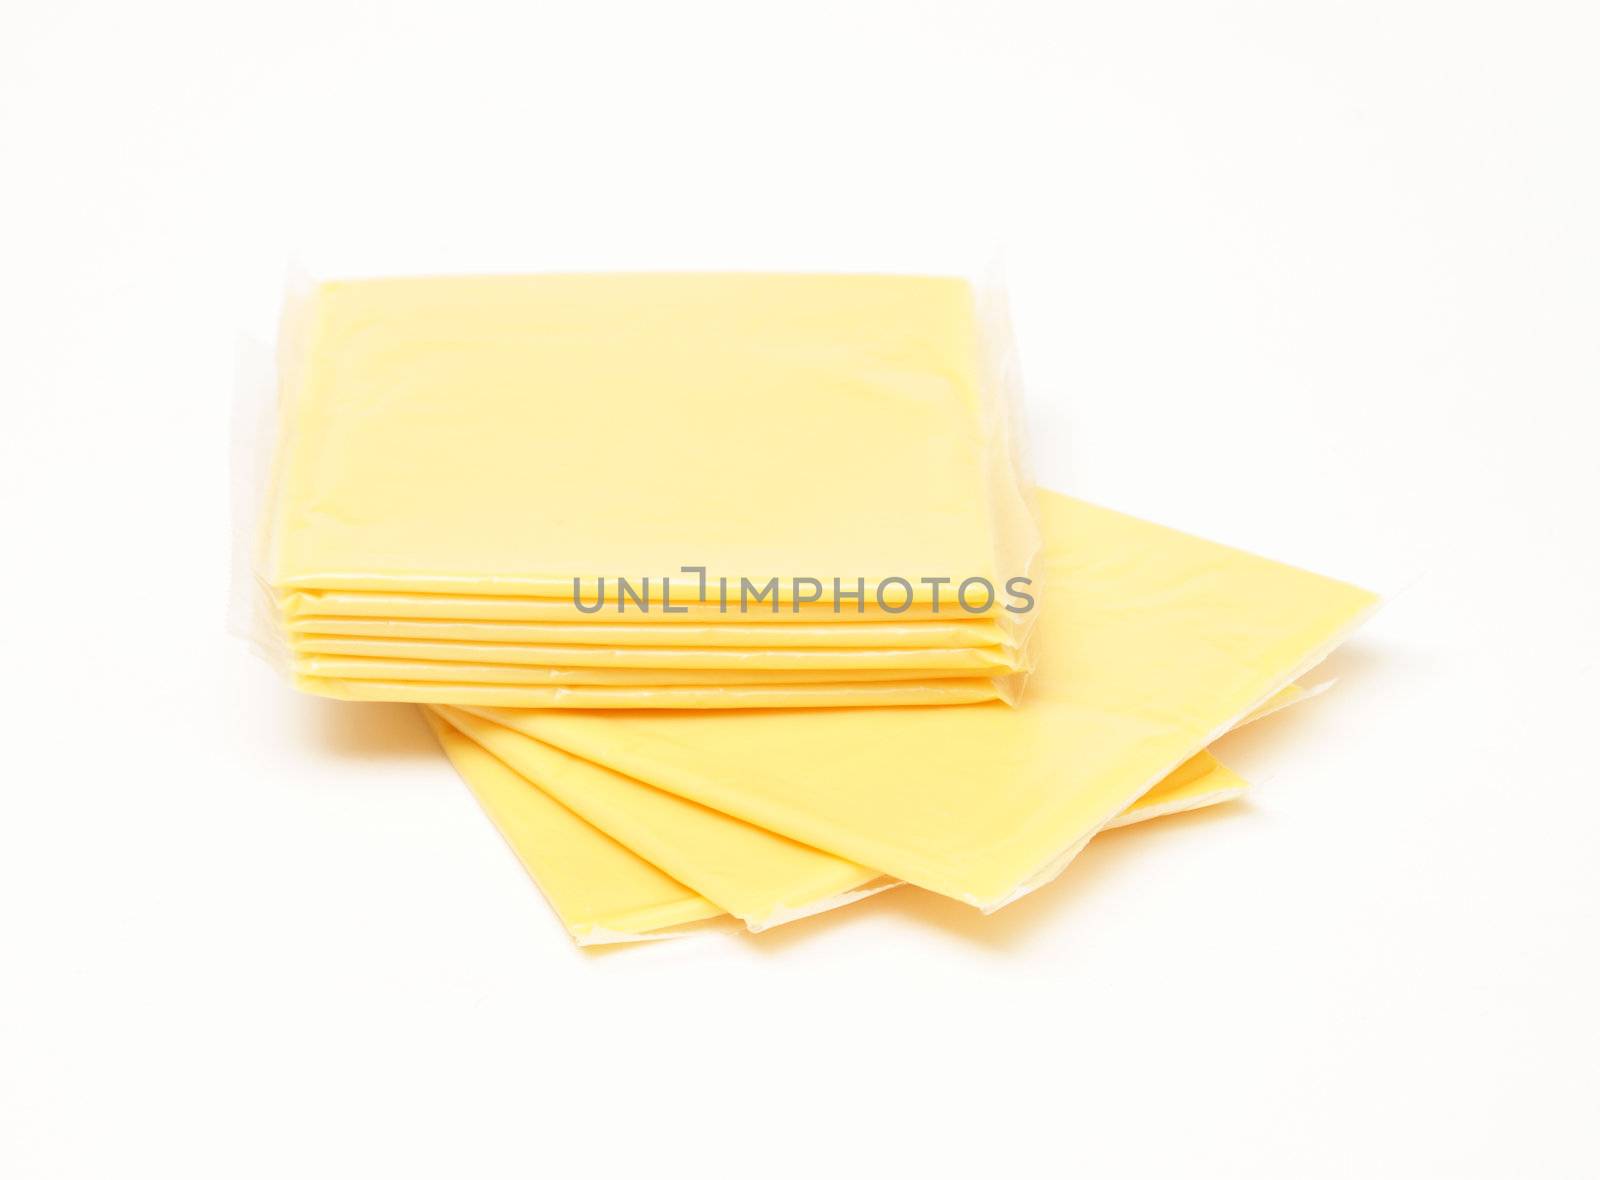 A stack of processed cheese slices over white background.